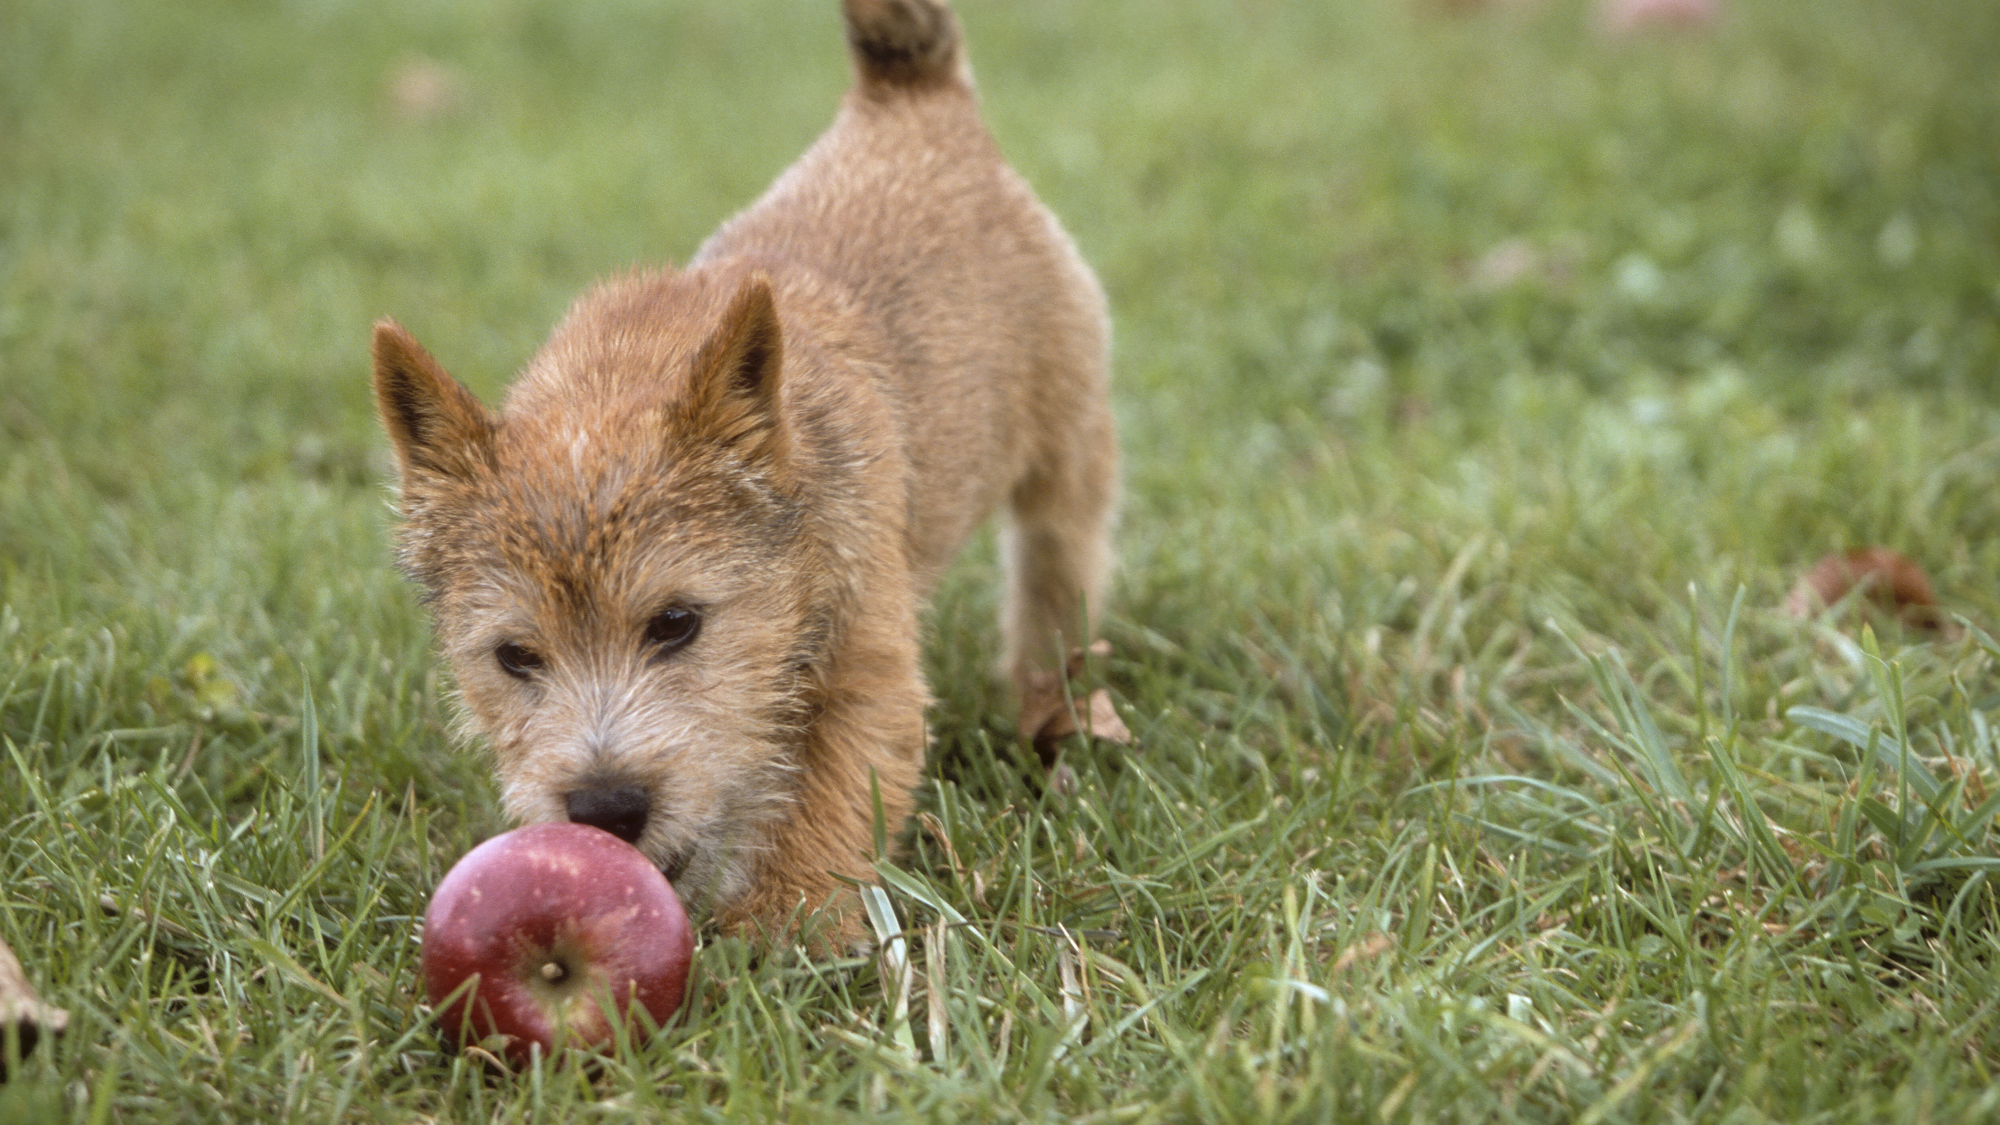 Norwich Terrier sniffing a red apple